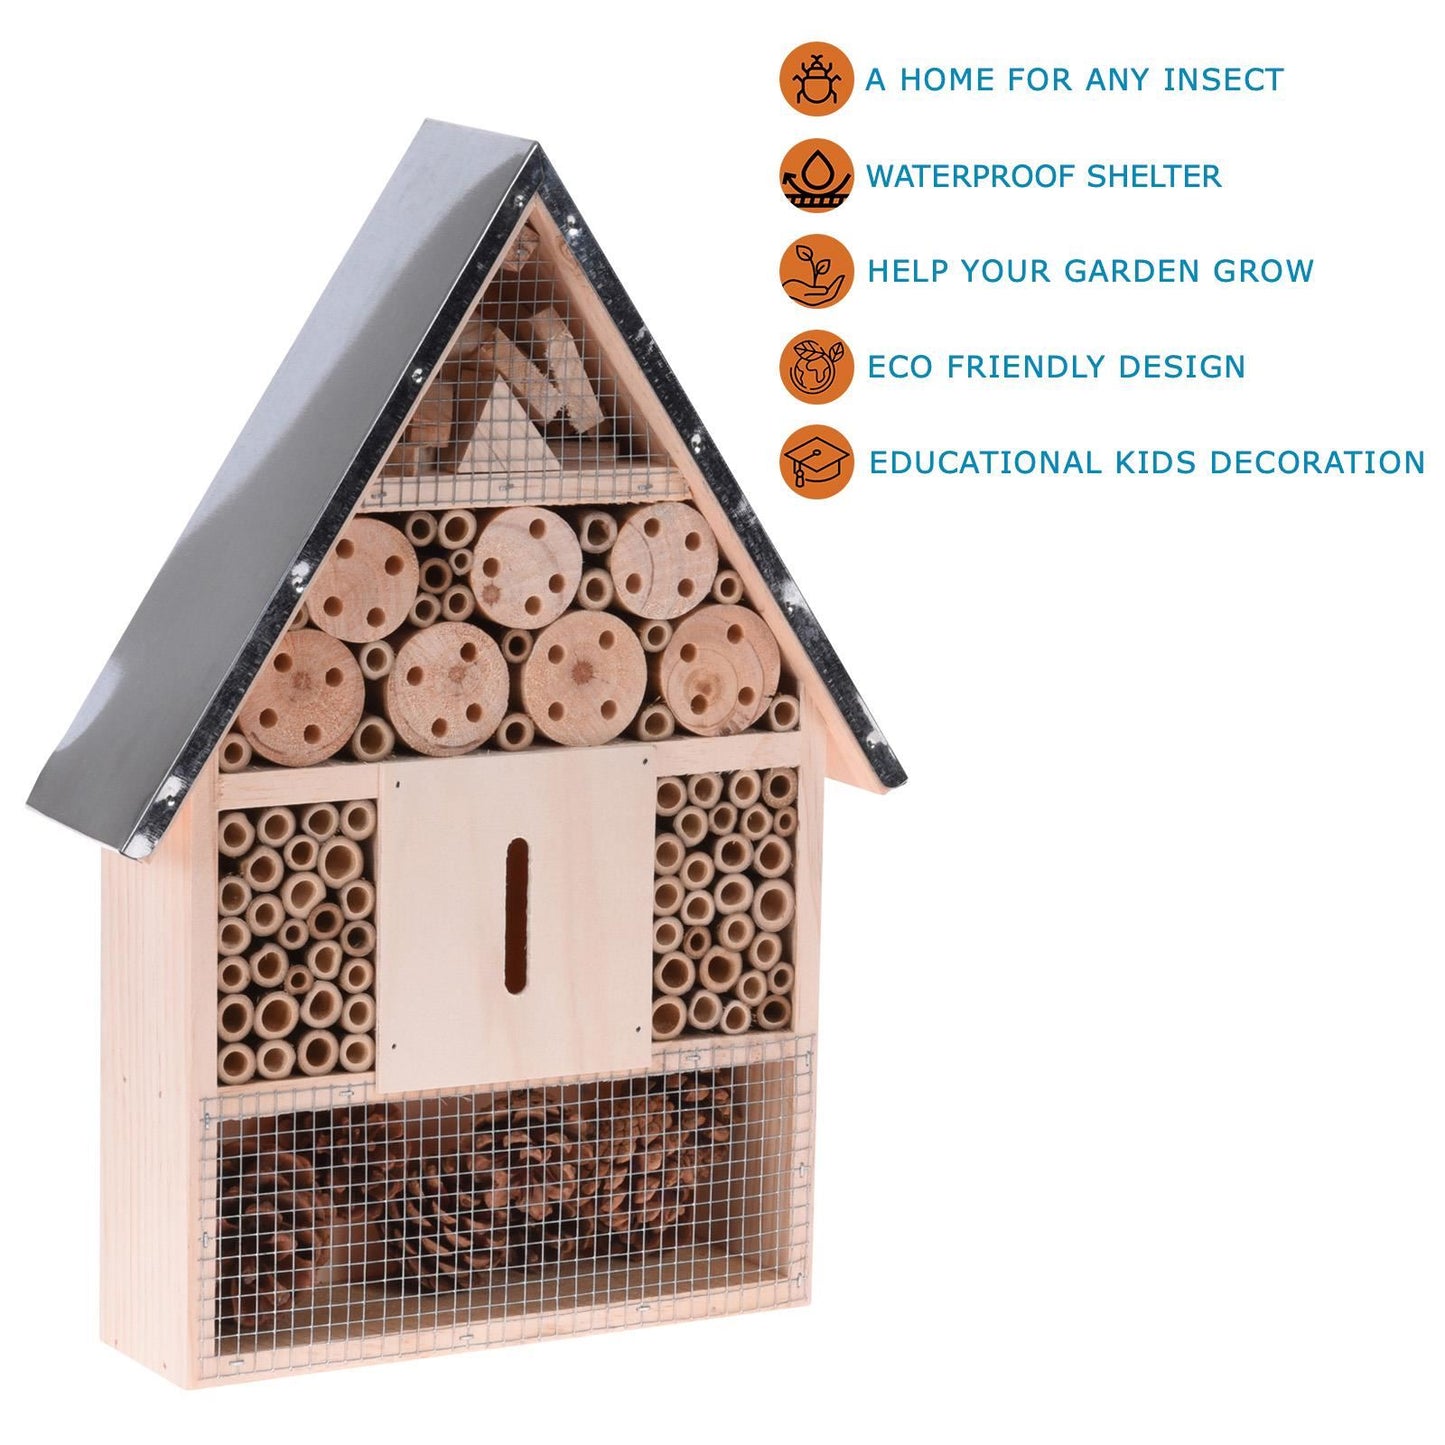 Wooden Insect Bug Hotel Habitat Eco-Friendly Garden Shelter